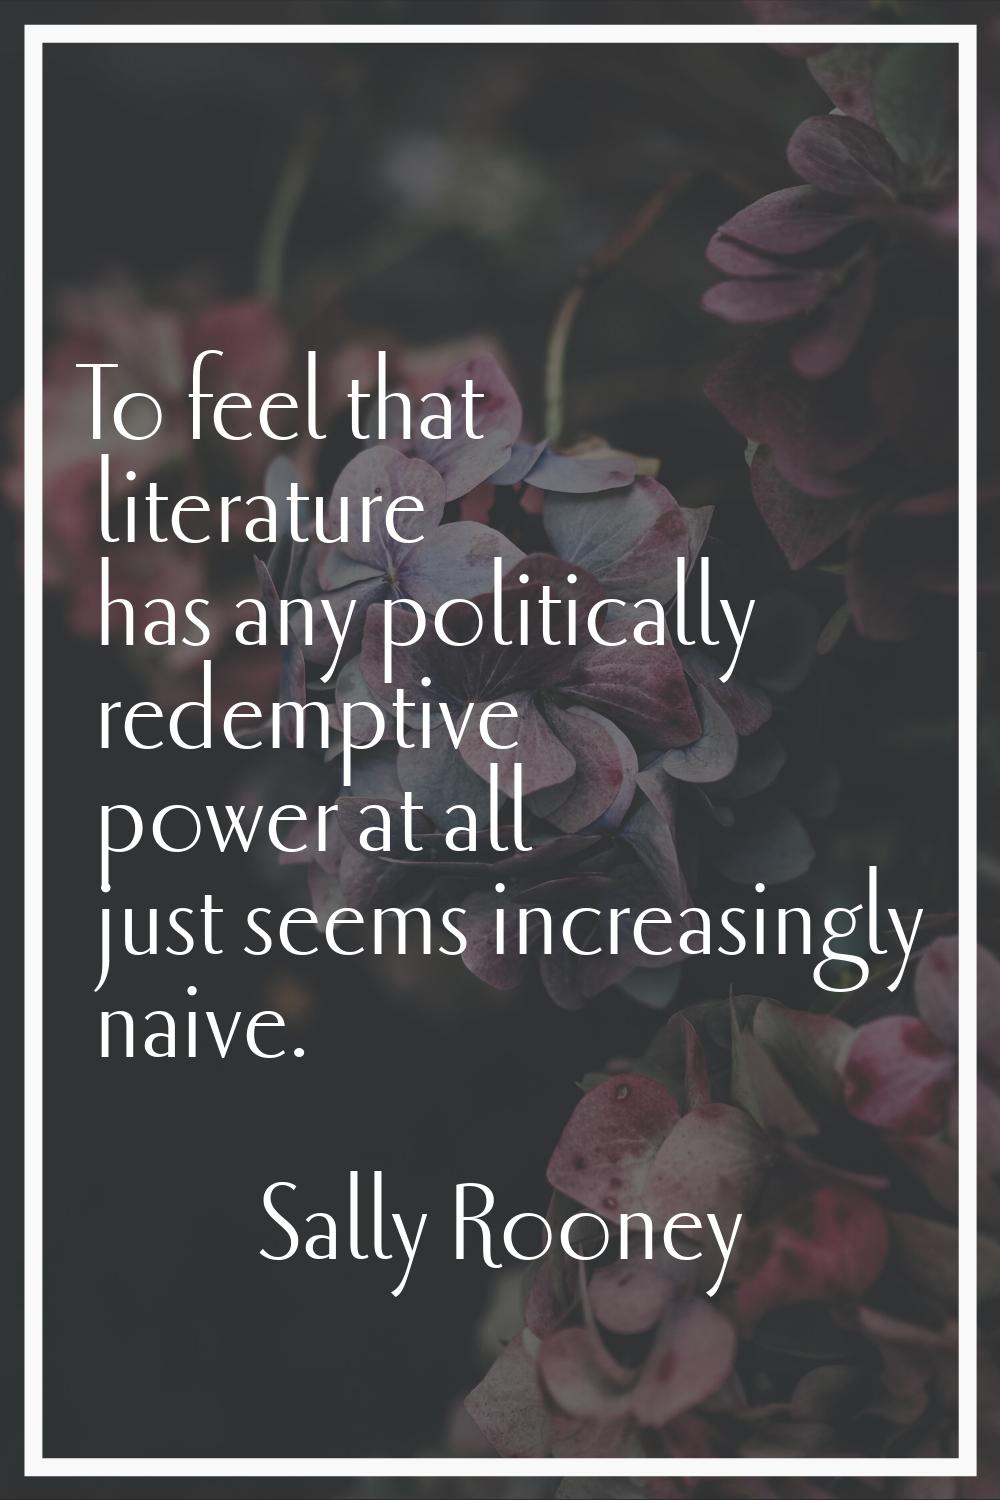 To feel that literature has any politically redemptive power at all just seems increasingly naive.